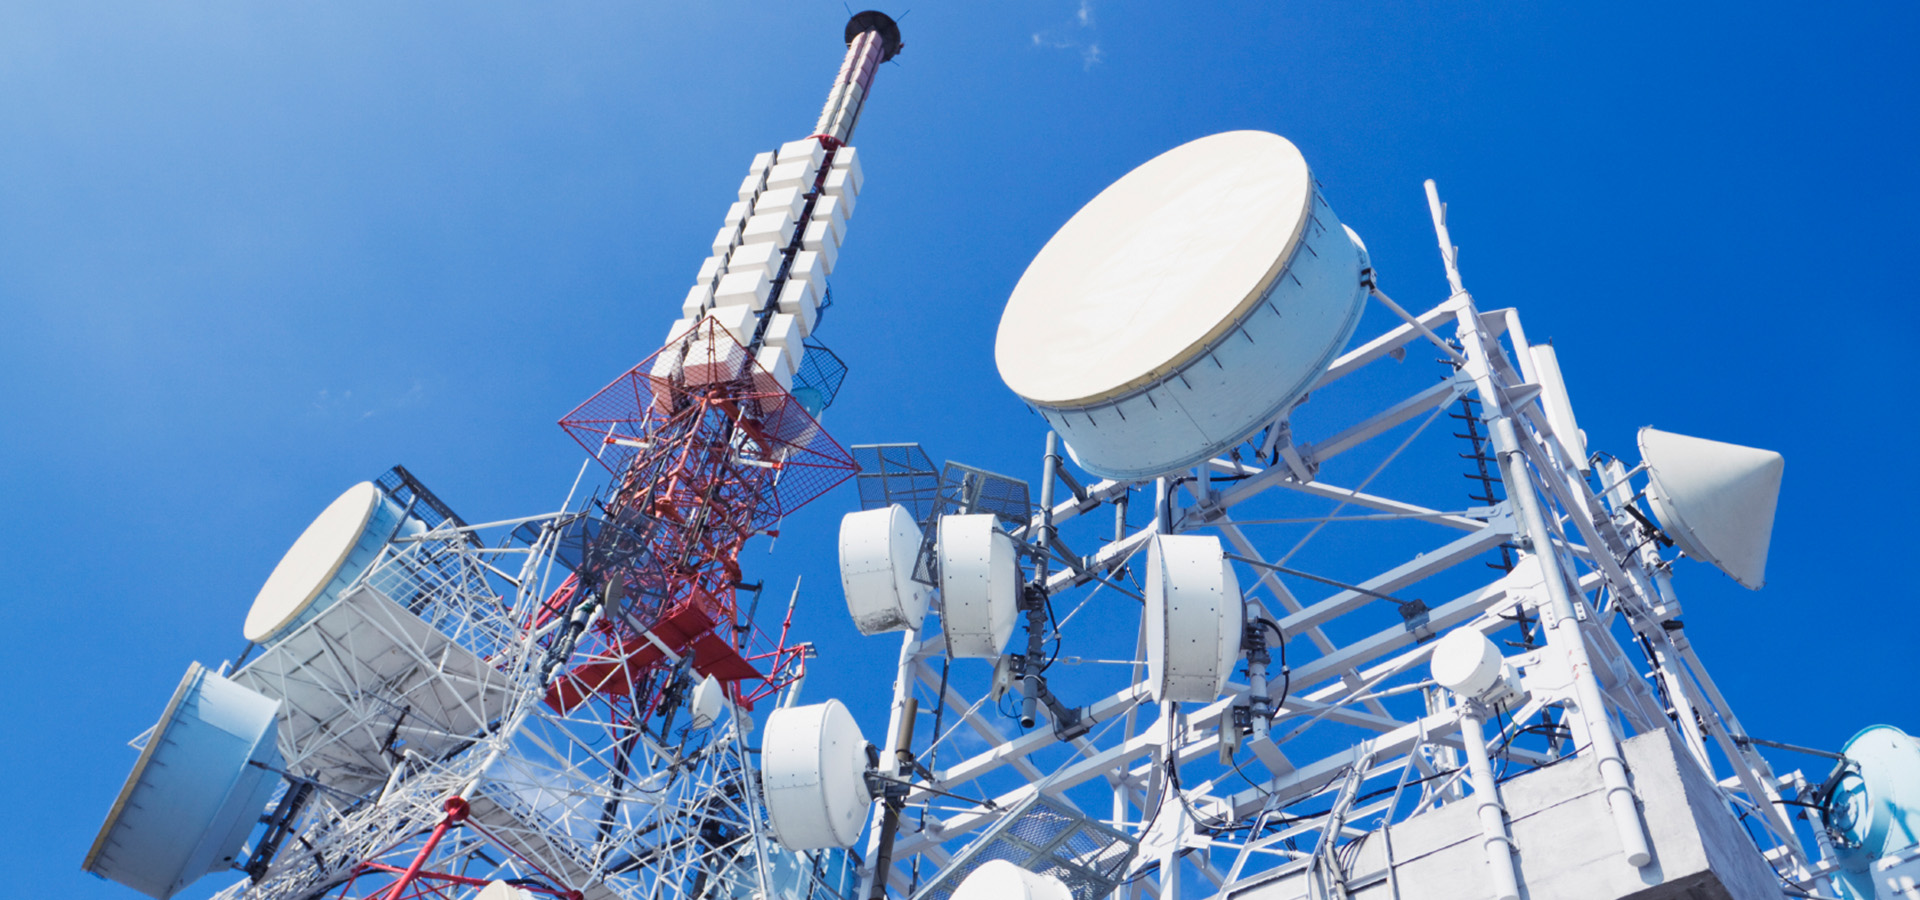 Telecom software solutions for the telecom industry